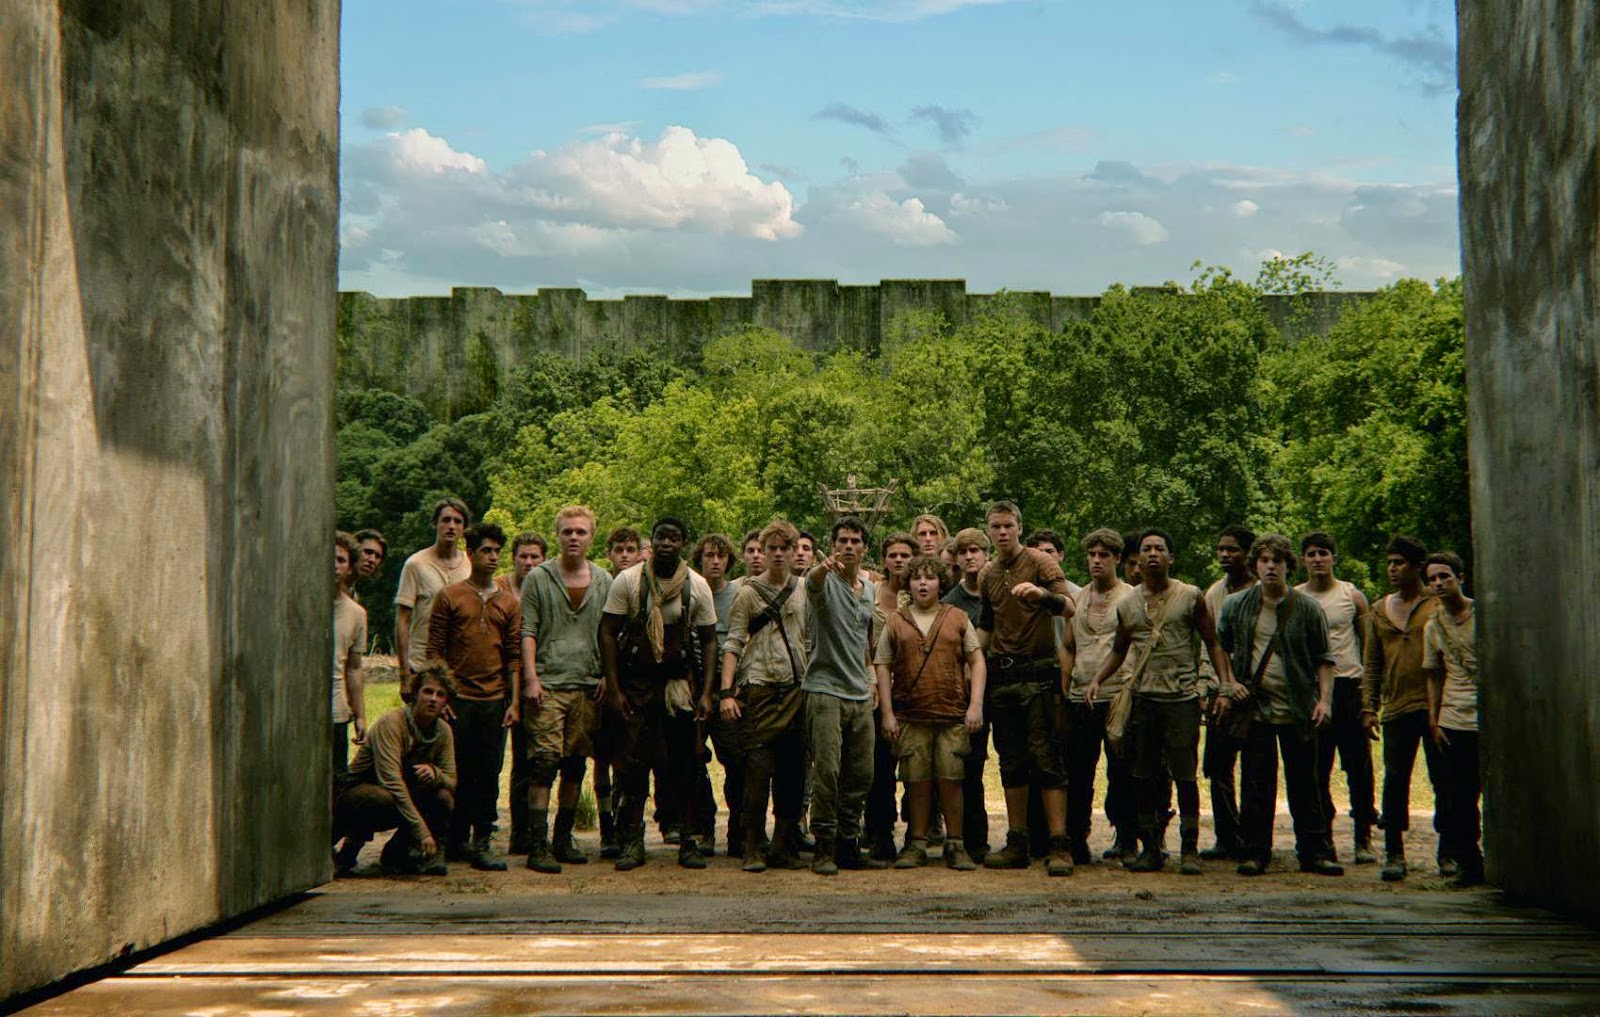 If You're 'The Maze Runner', You Run Like Hell (Movie Review)